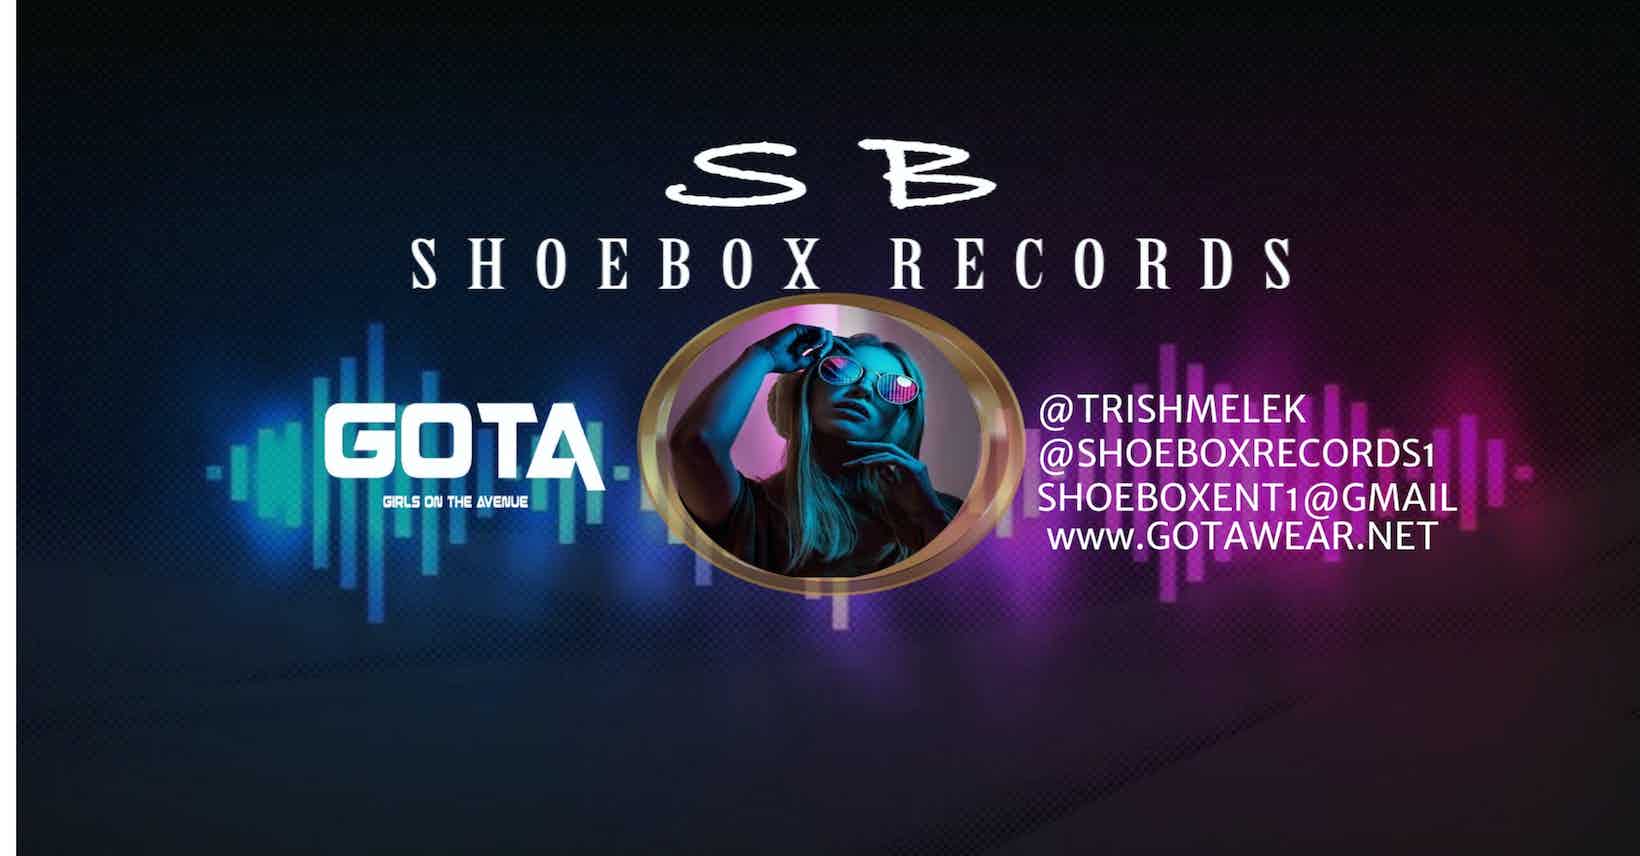 Interview with Dance Artist & Shoebox Records CEO Trish Melek